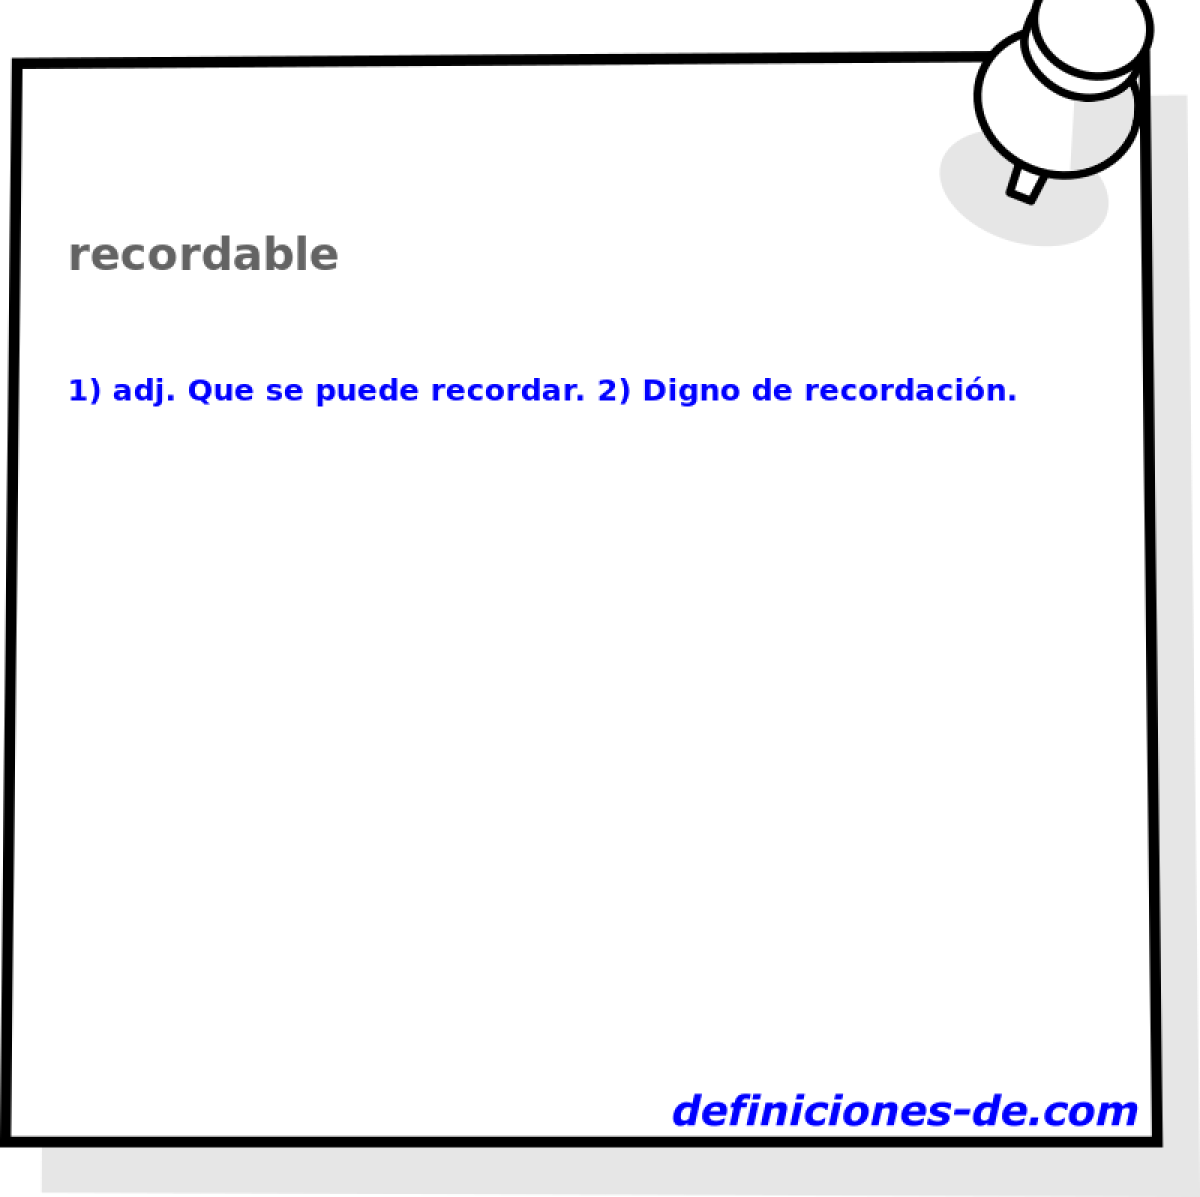 recordable 